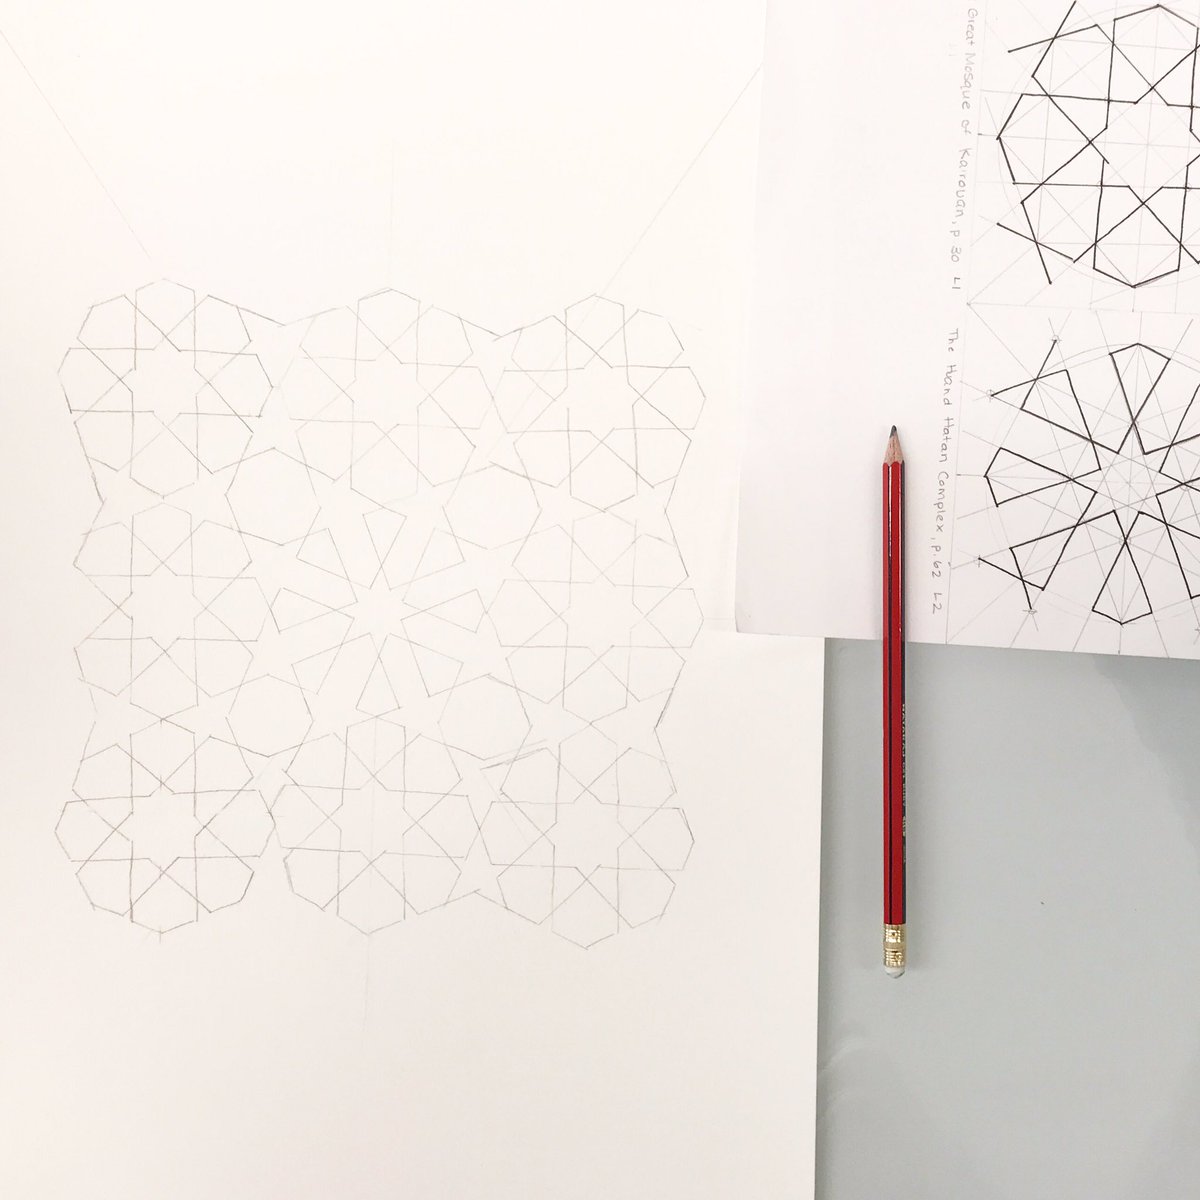 Creating my first #islamicpattern design. It’s not perfect, but it’s been fun learning and creating! Can’t wait to show my #highschoolart students! #professionallearning #schoolofislamicgeometricdesign